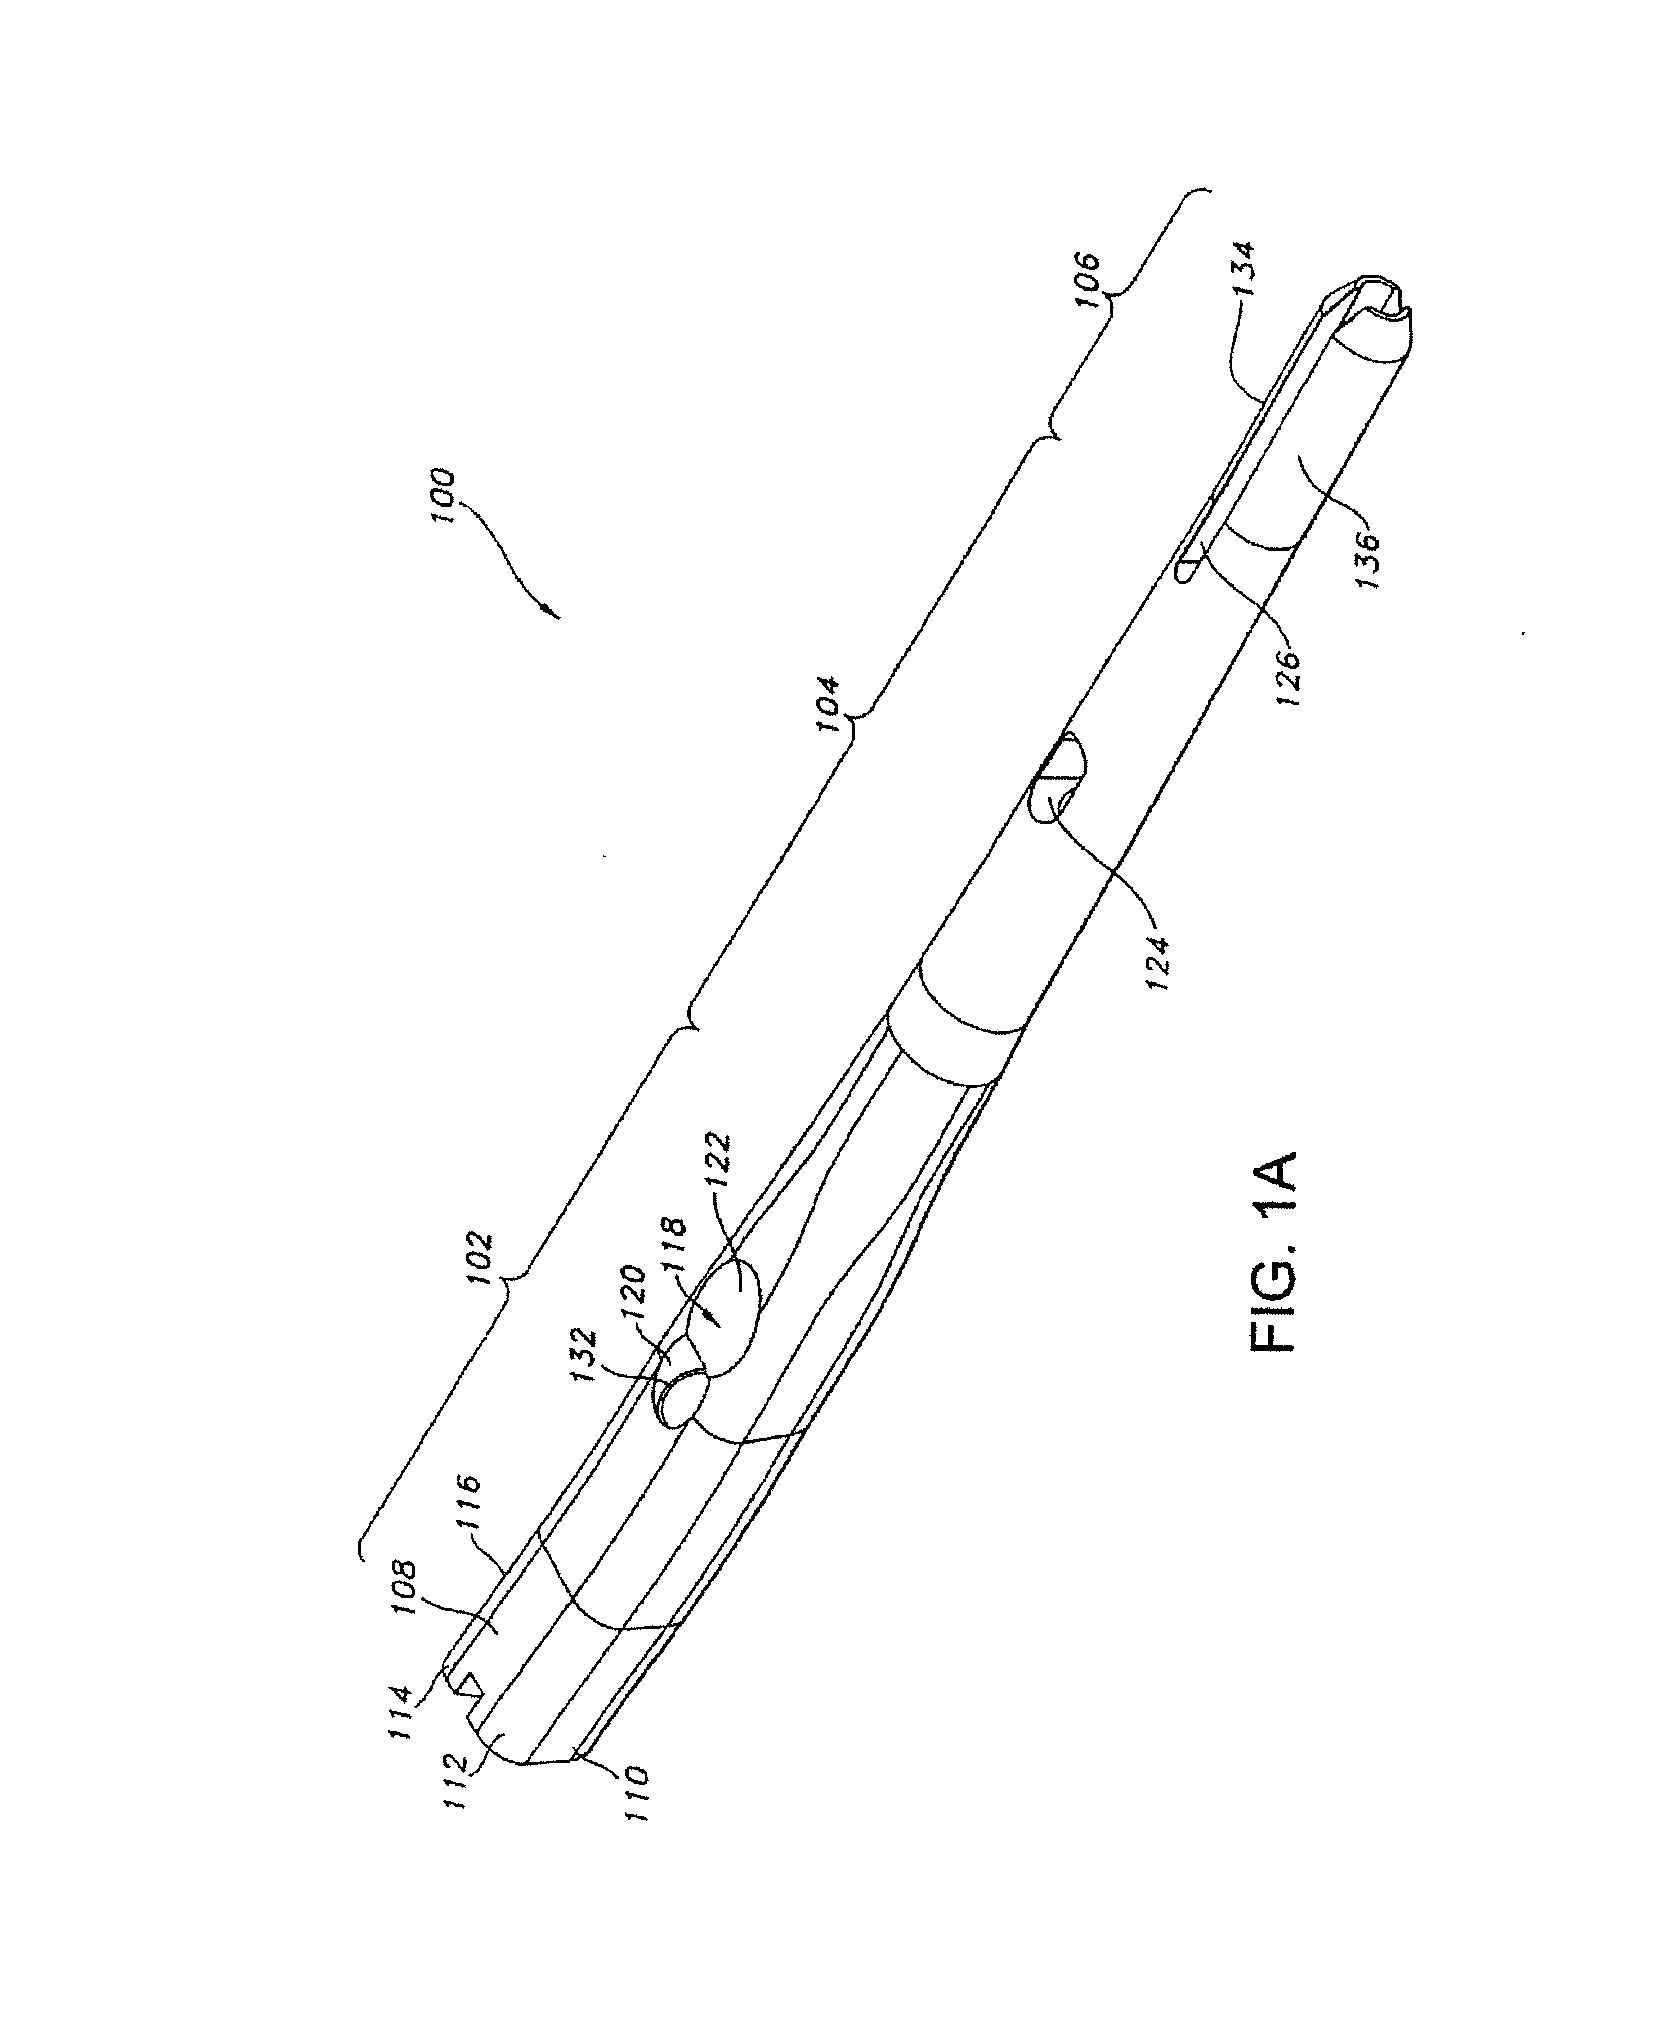 Polyaxial fastener systems and methods